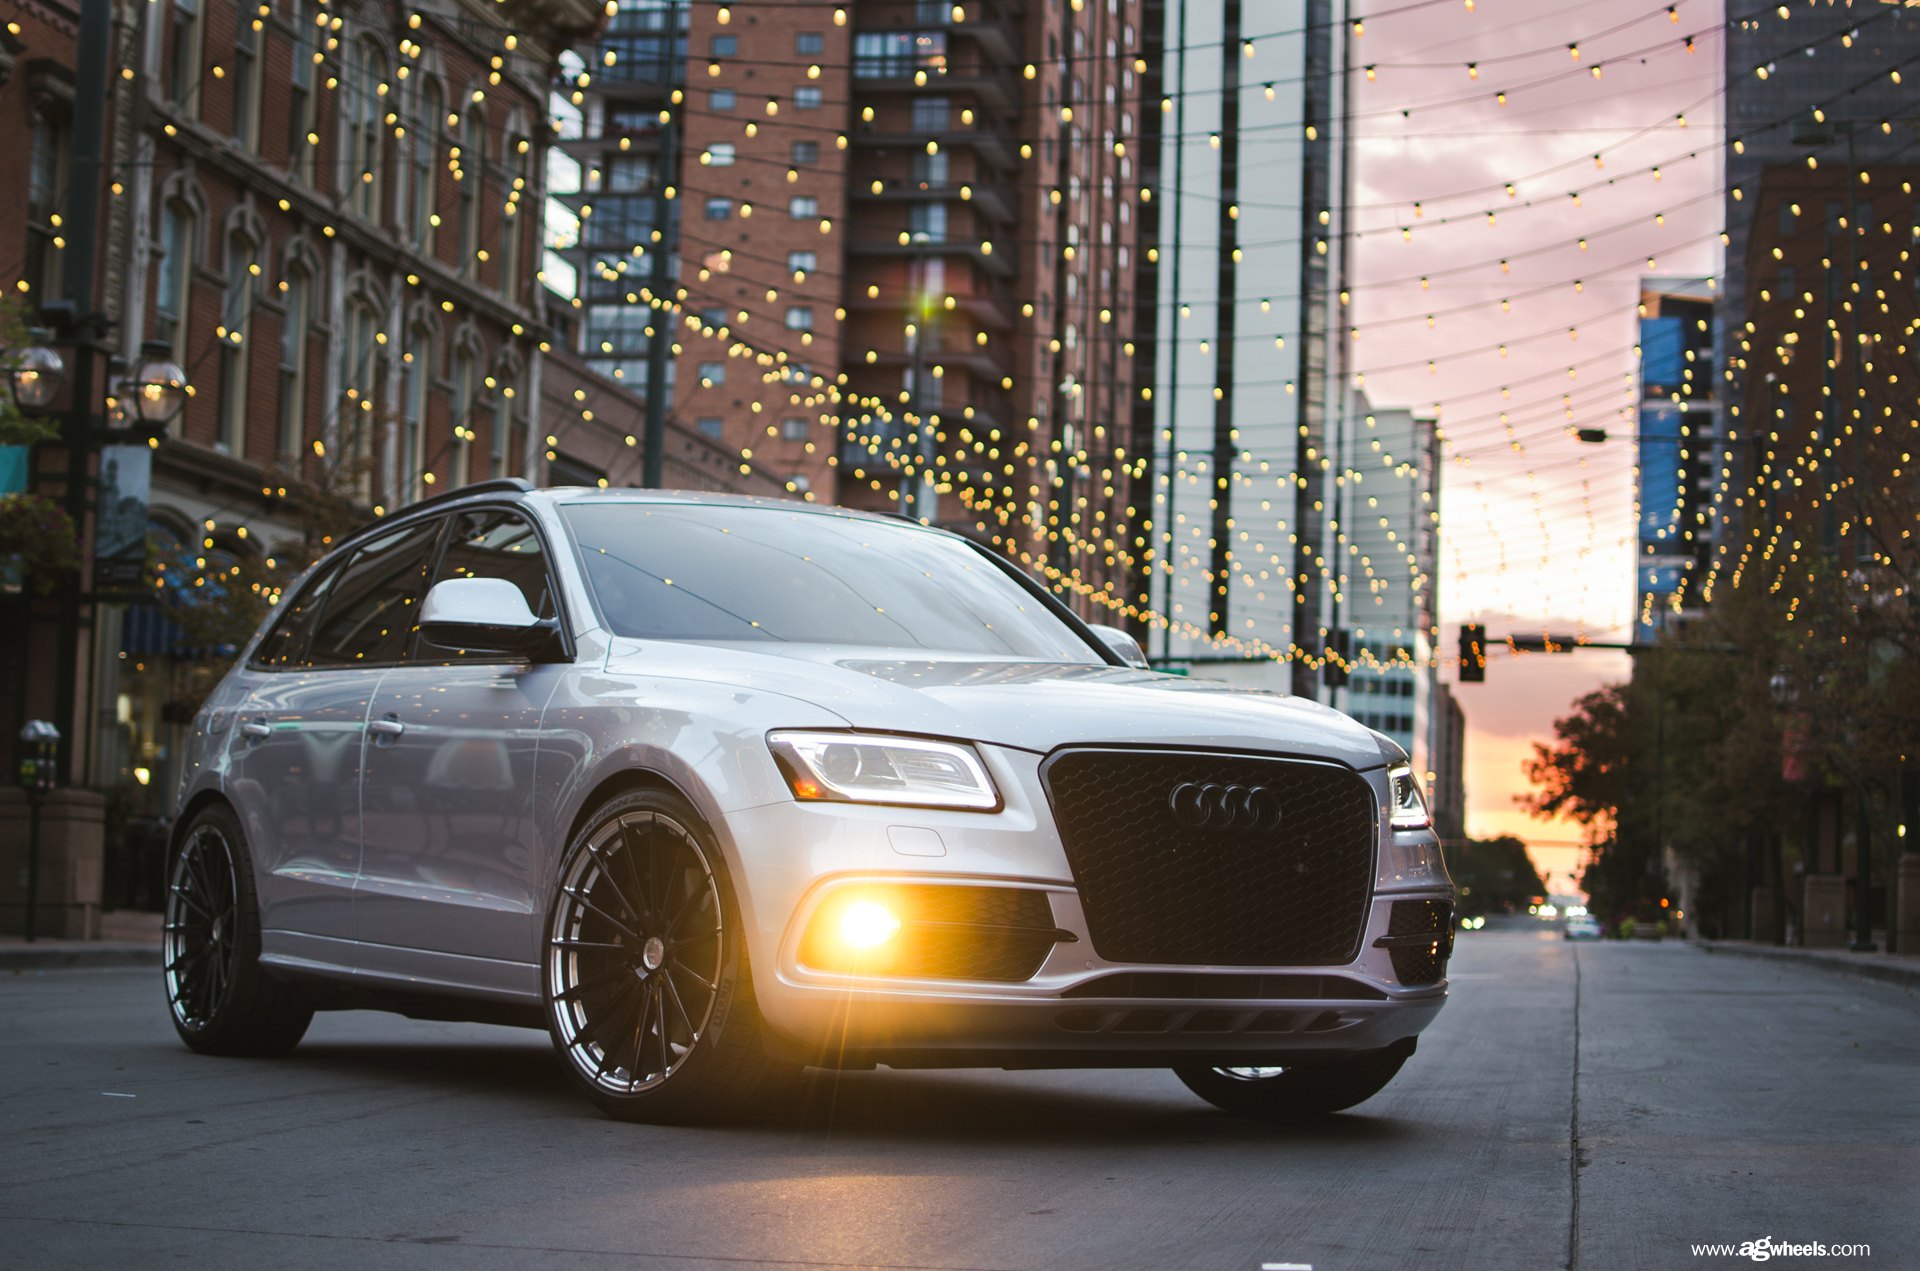 Gray Audi Q5 with Blacked Out Grille - Photo by Avant Garde Wheels